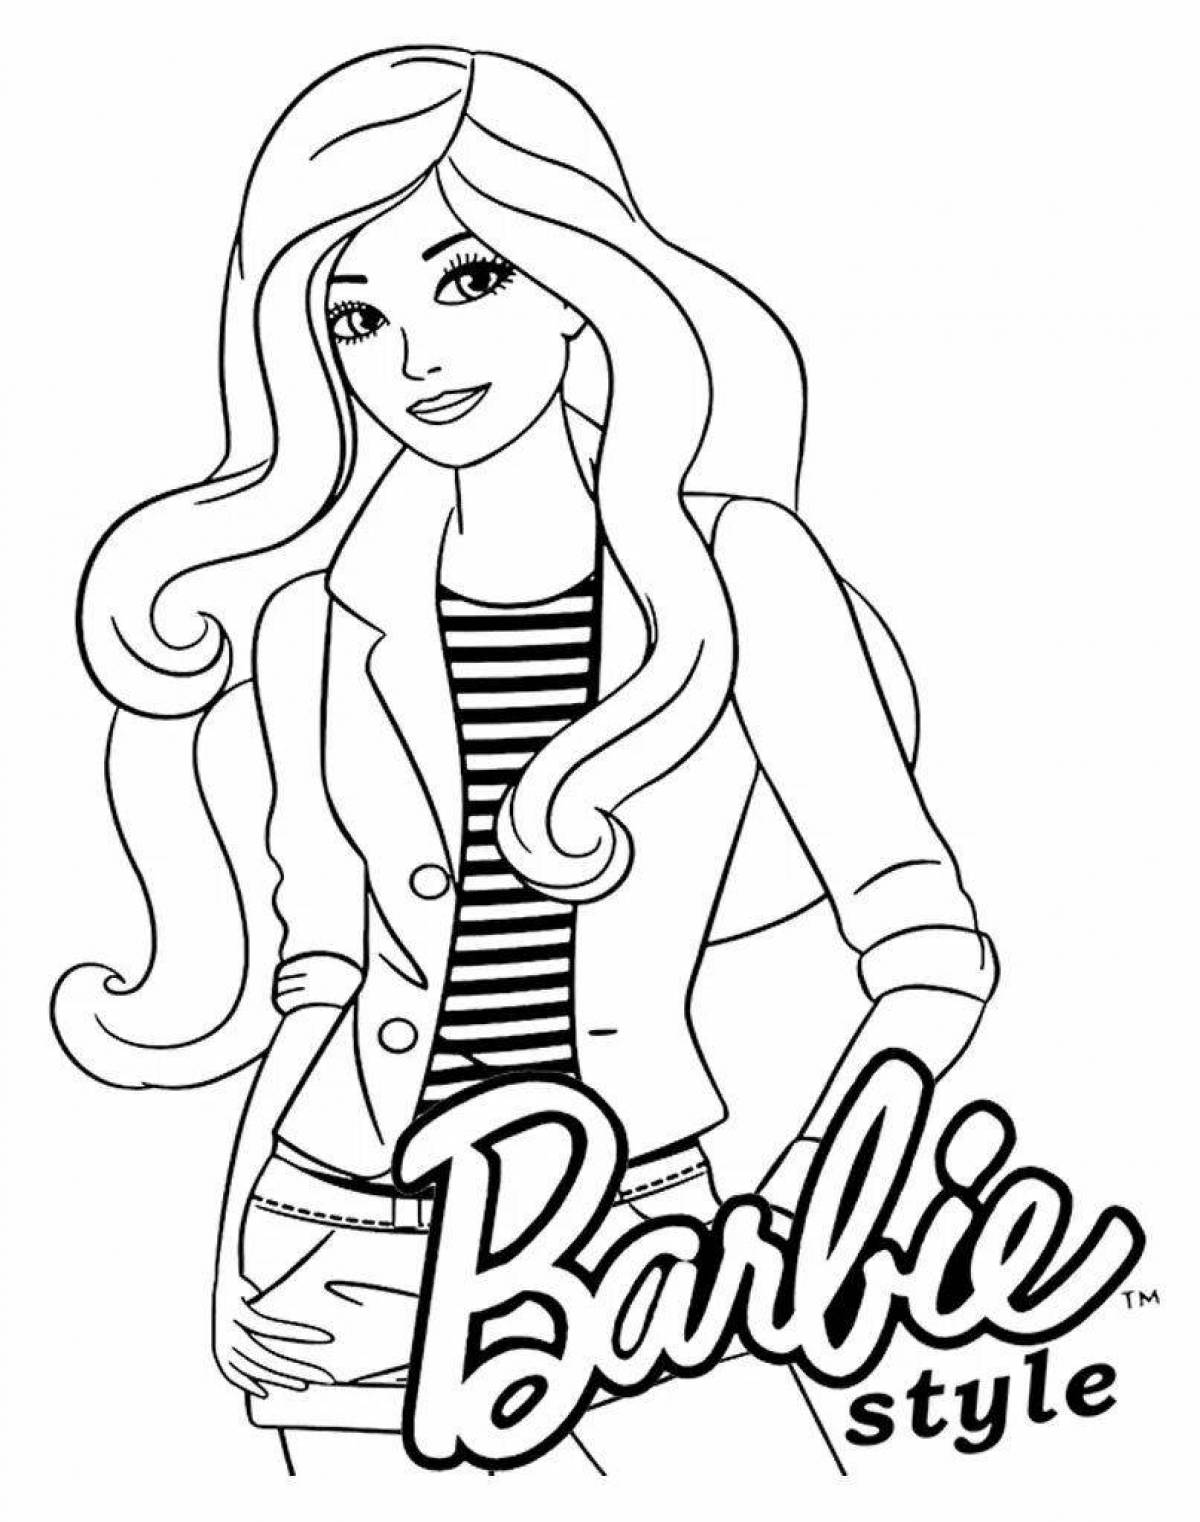 Exotic old barbie coloring book